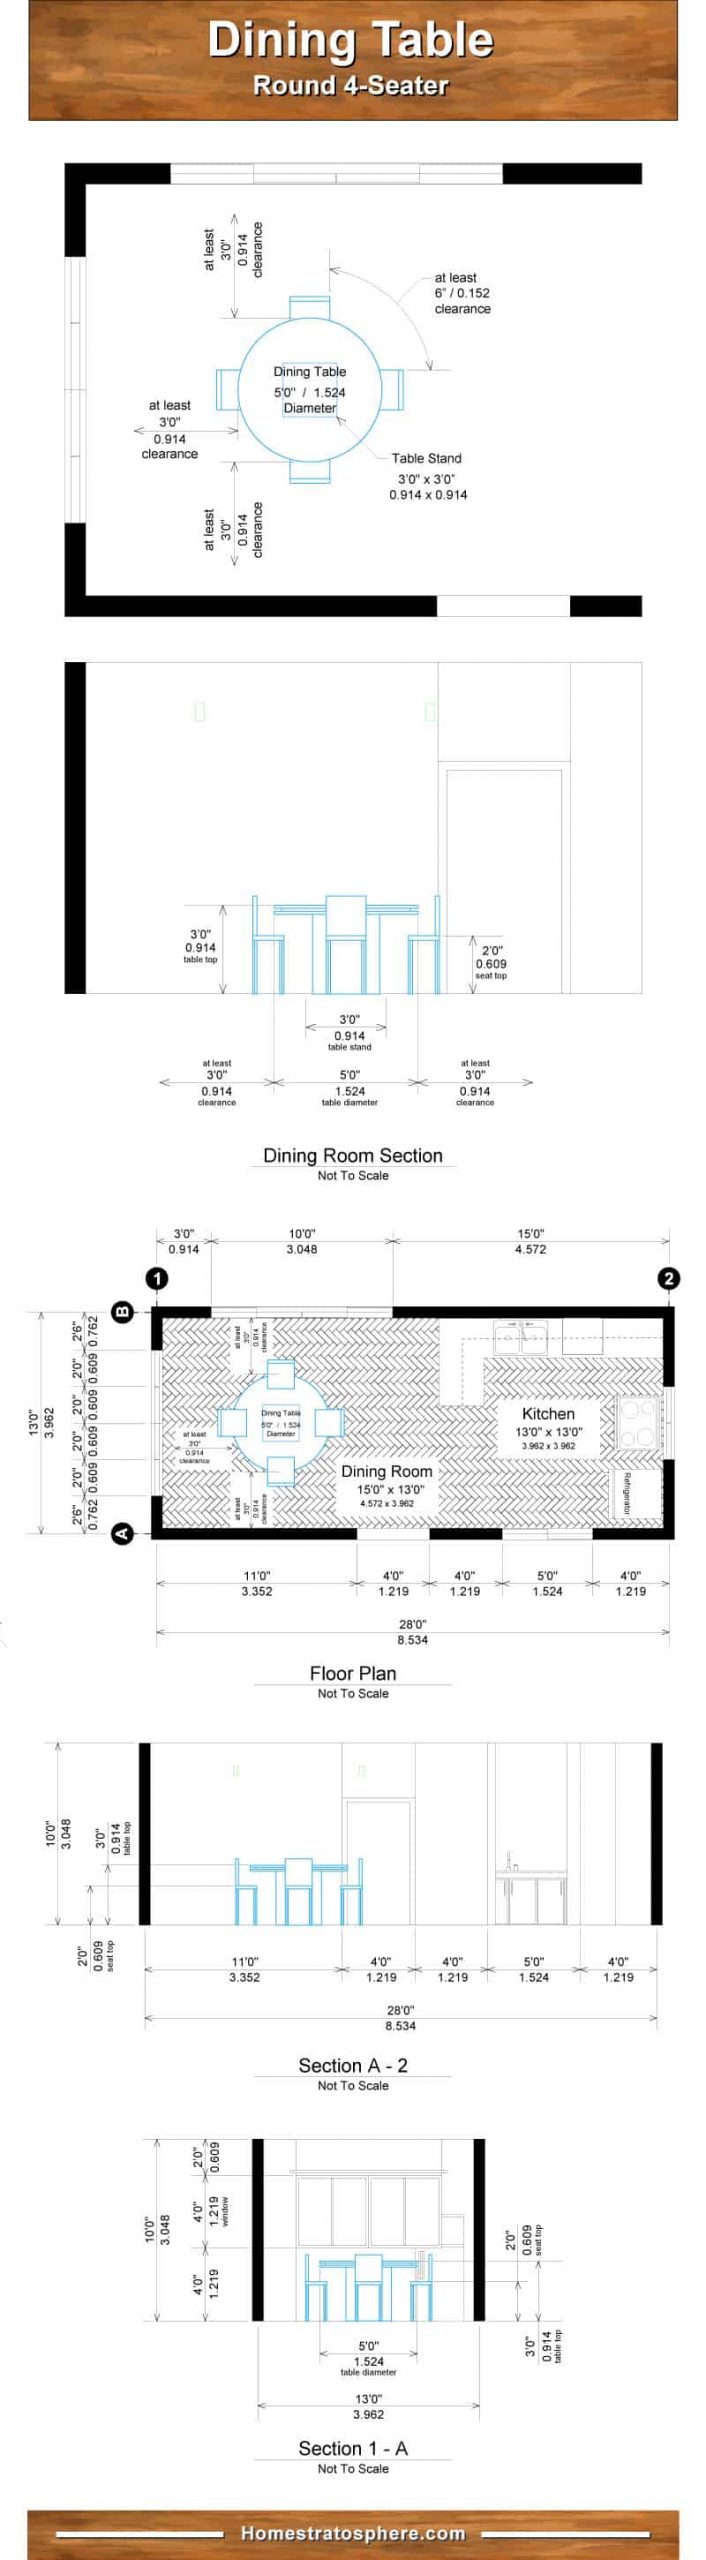 Proper Dining Room Table Dimensions For 4 6 8 10 And 12 with measurements 800 X 2900